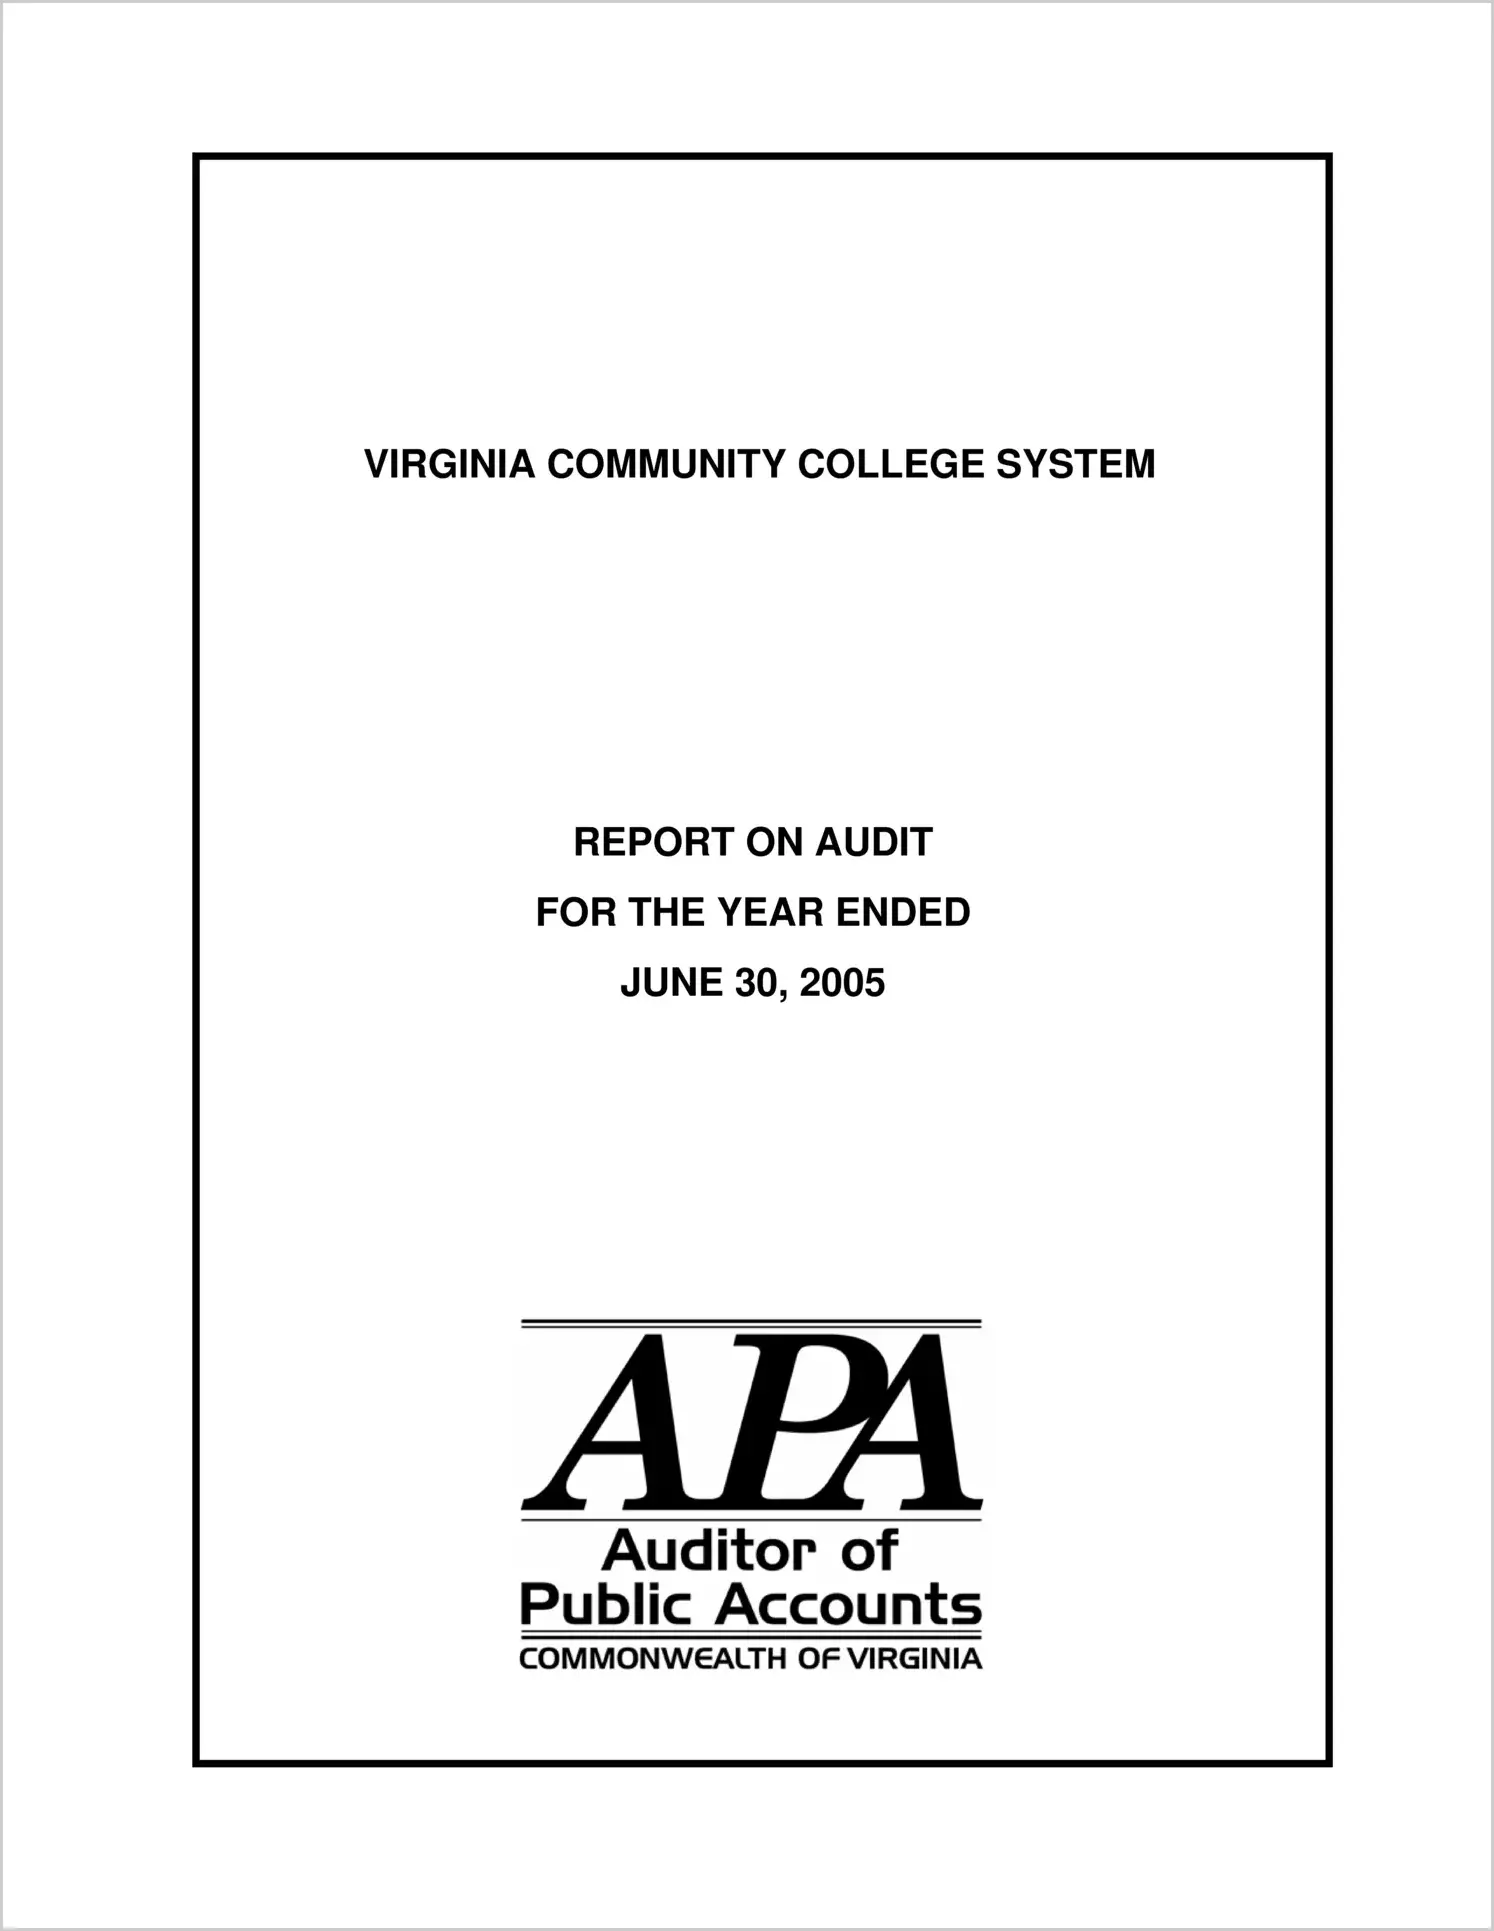 Virginia Community College System for the year ended June 30, 2005